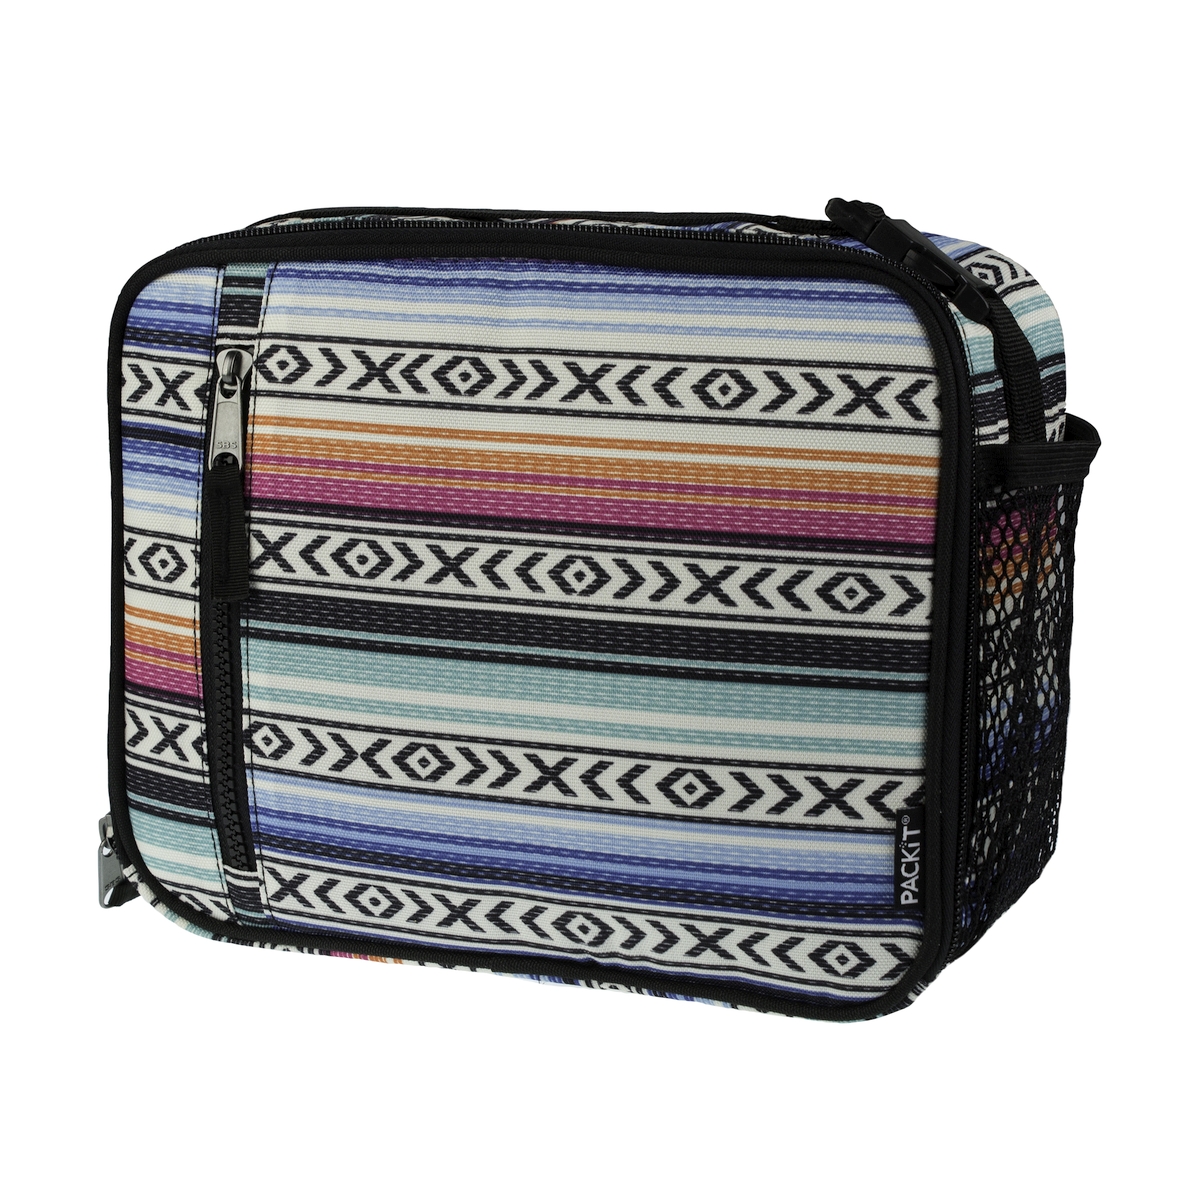     Classic Lunch box Fiesta (PACKiT PACKIT0025)